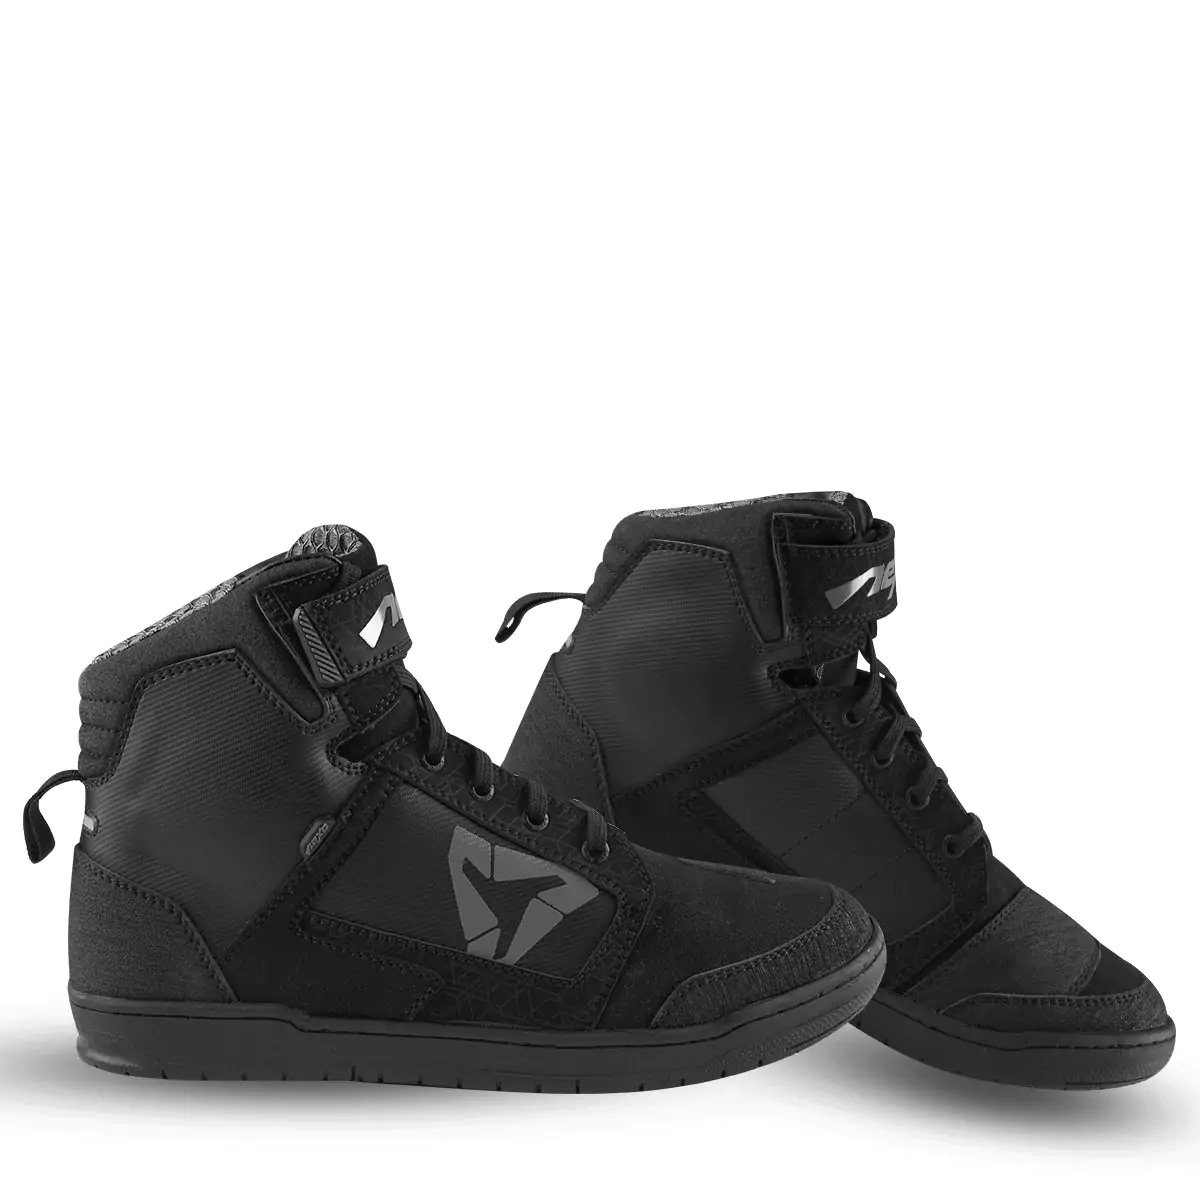 pair of black motorcycle sneaker shoes with black boundary